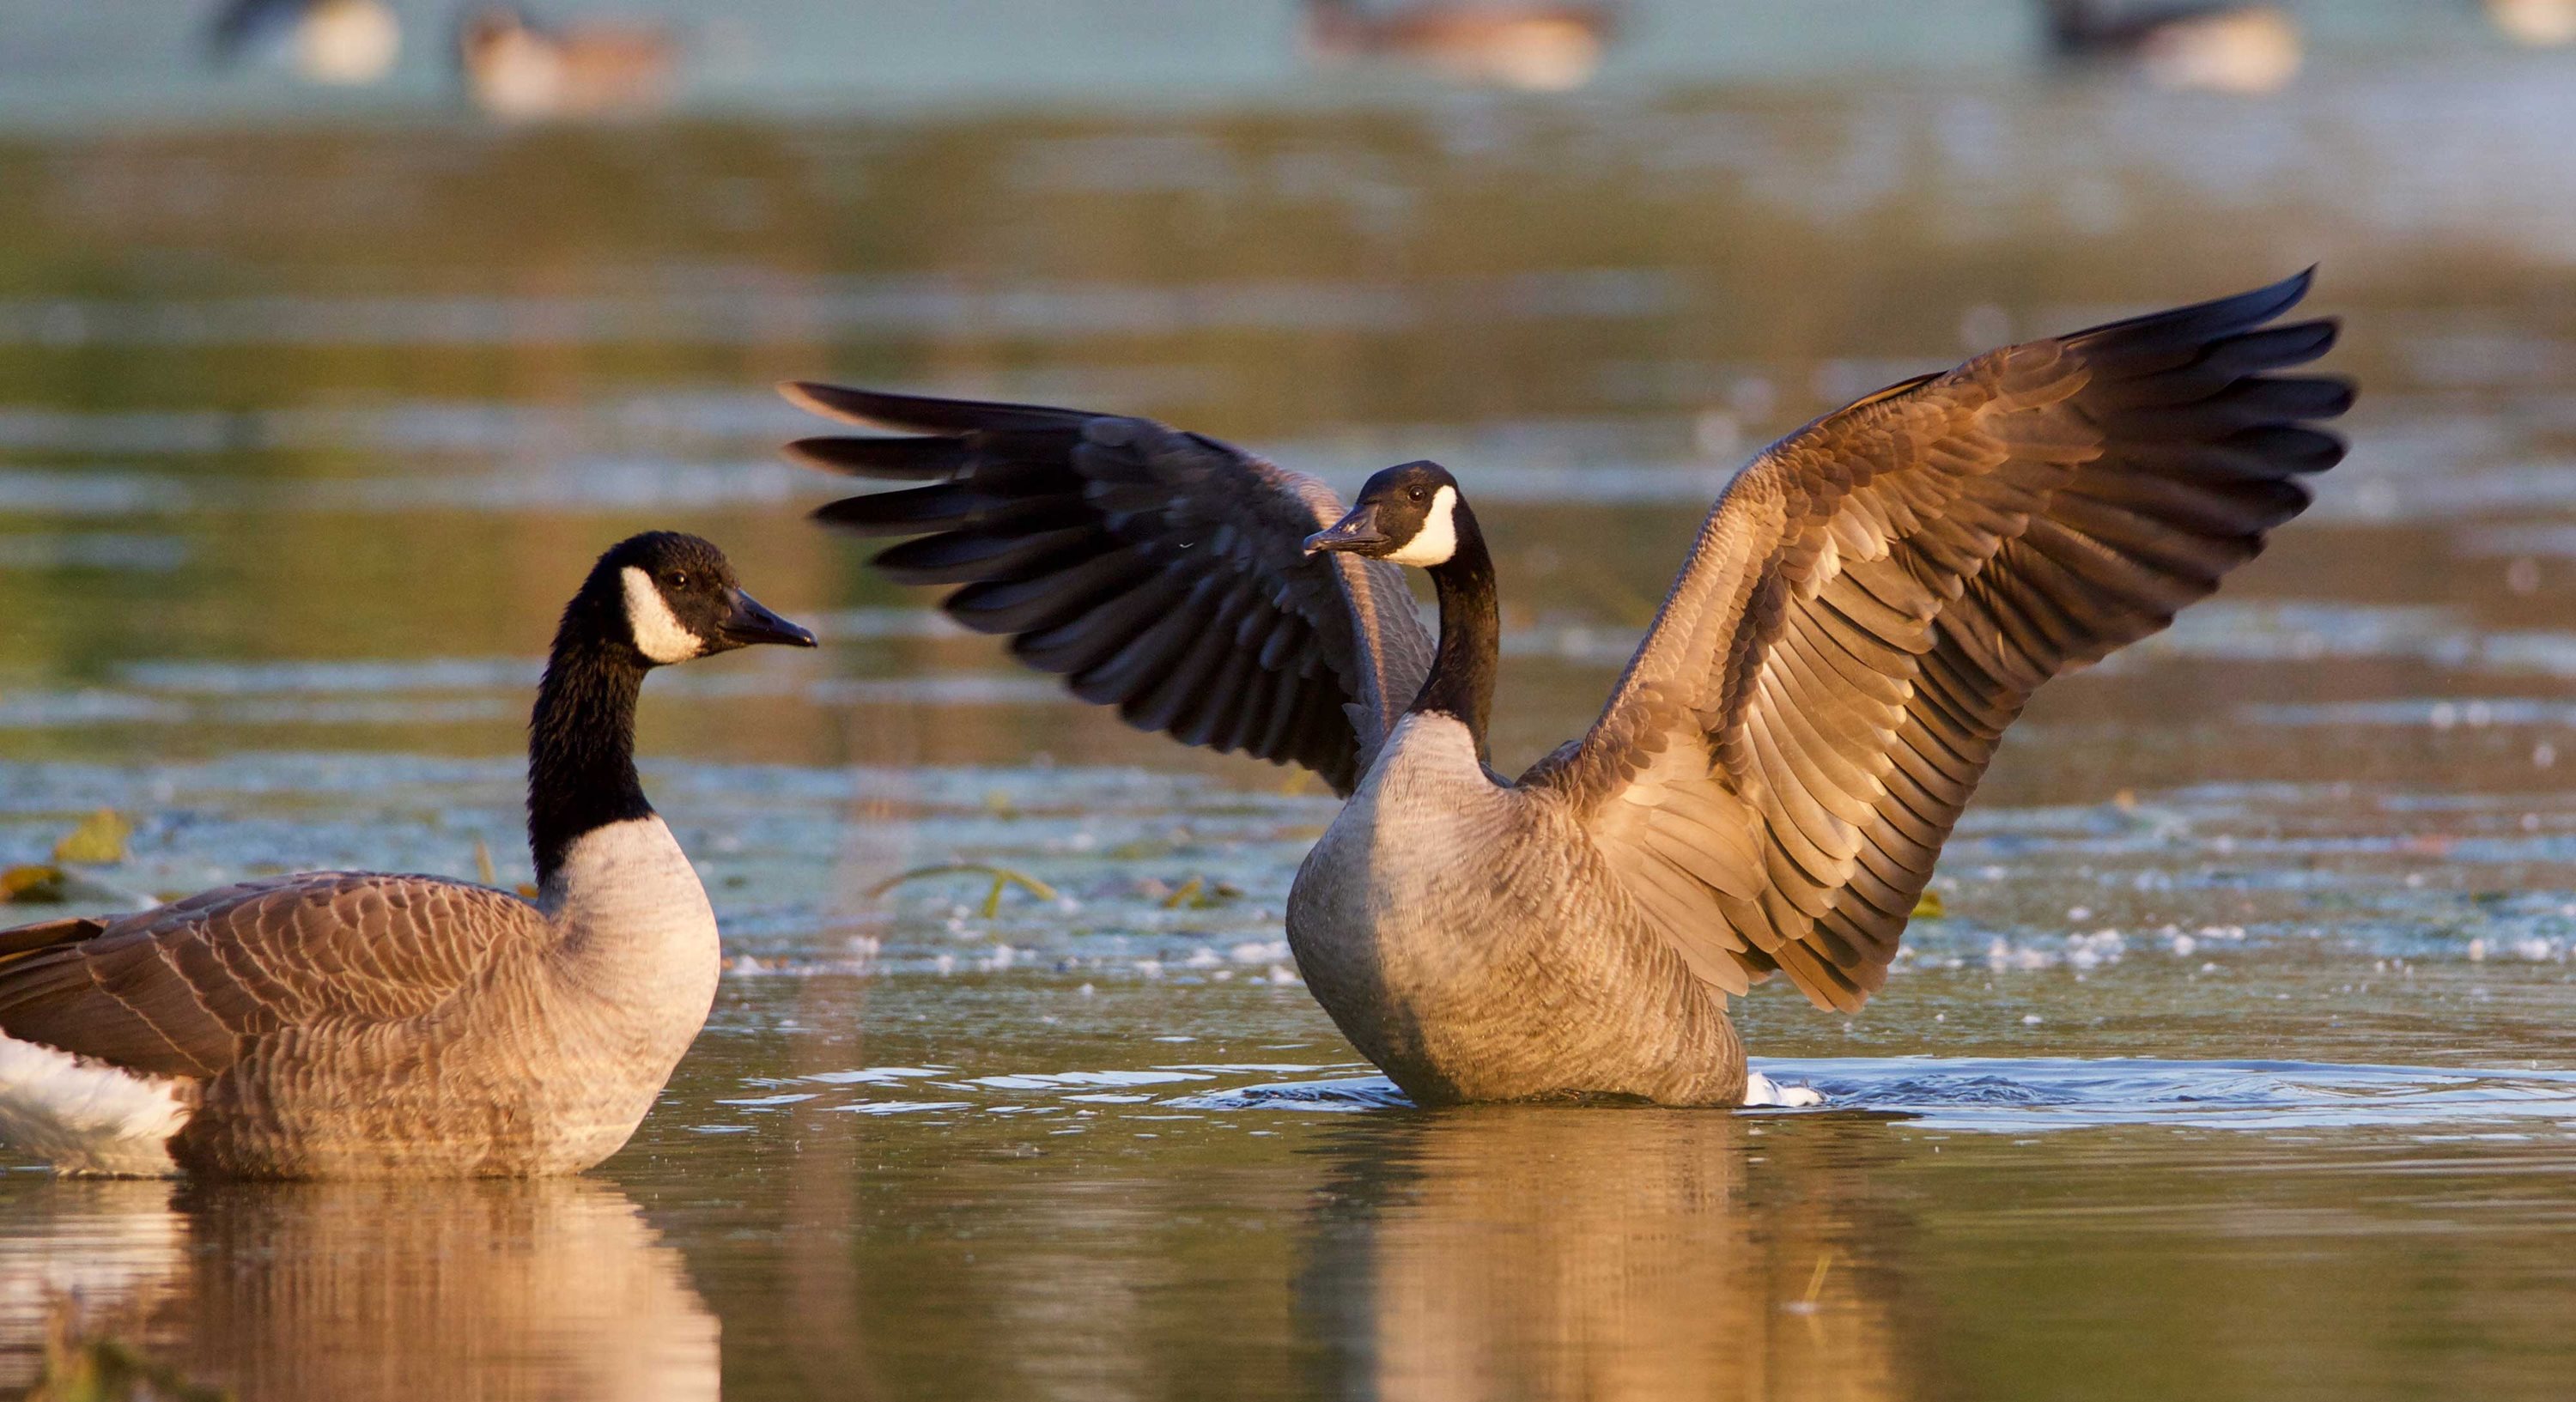 Two Canada geese in the water.